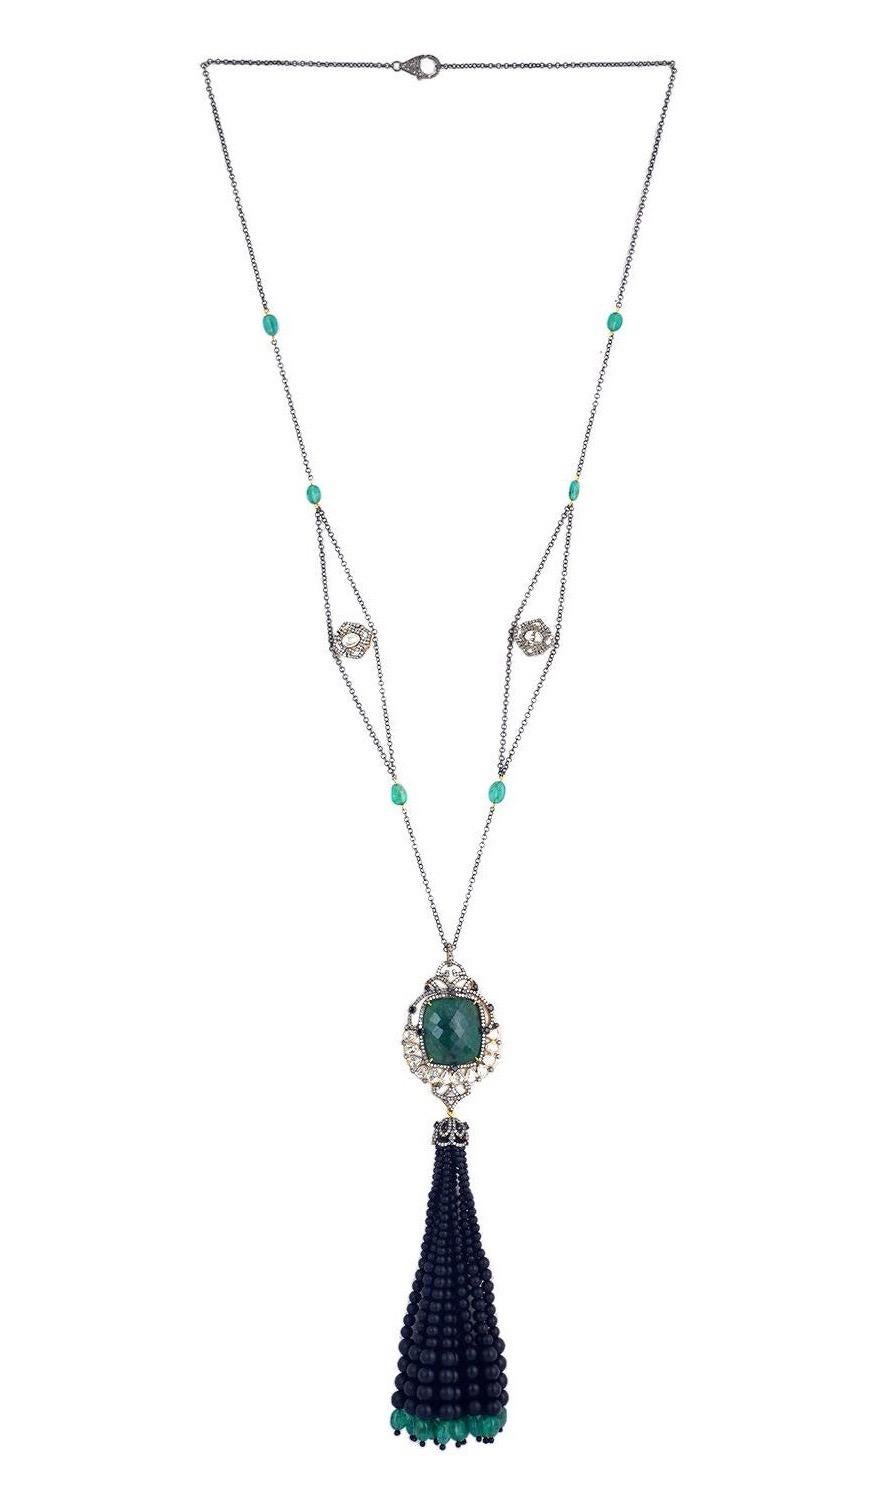 A stunning tassel necklace is handmade in 18K gold and sterling silver. It is set in 49.17 carats emerald, 161.6 carats onyx & 5.49 carats of glimmering diamonds. Clasp Closure

FOLLOW  MEGHNA JEWELS storefront to view the latest collection &